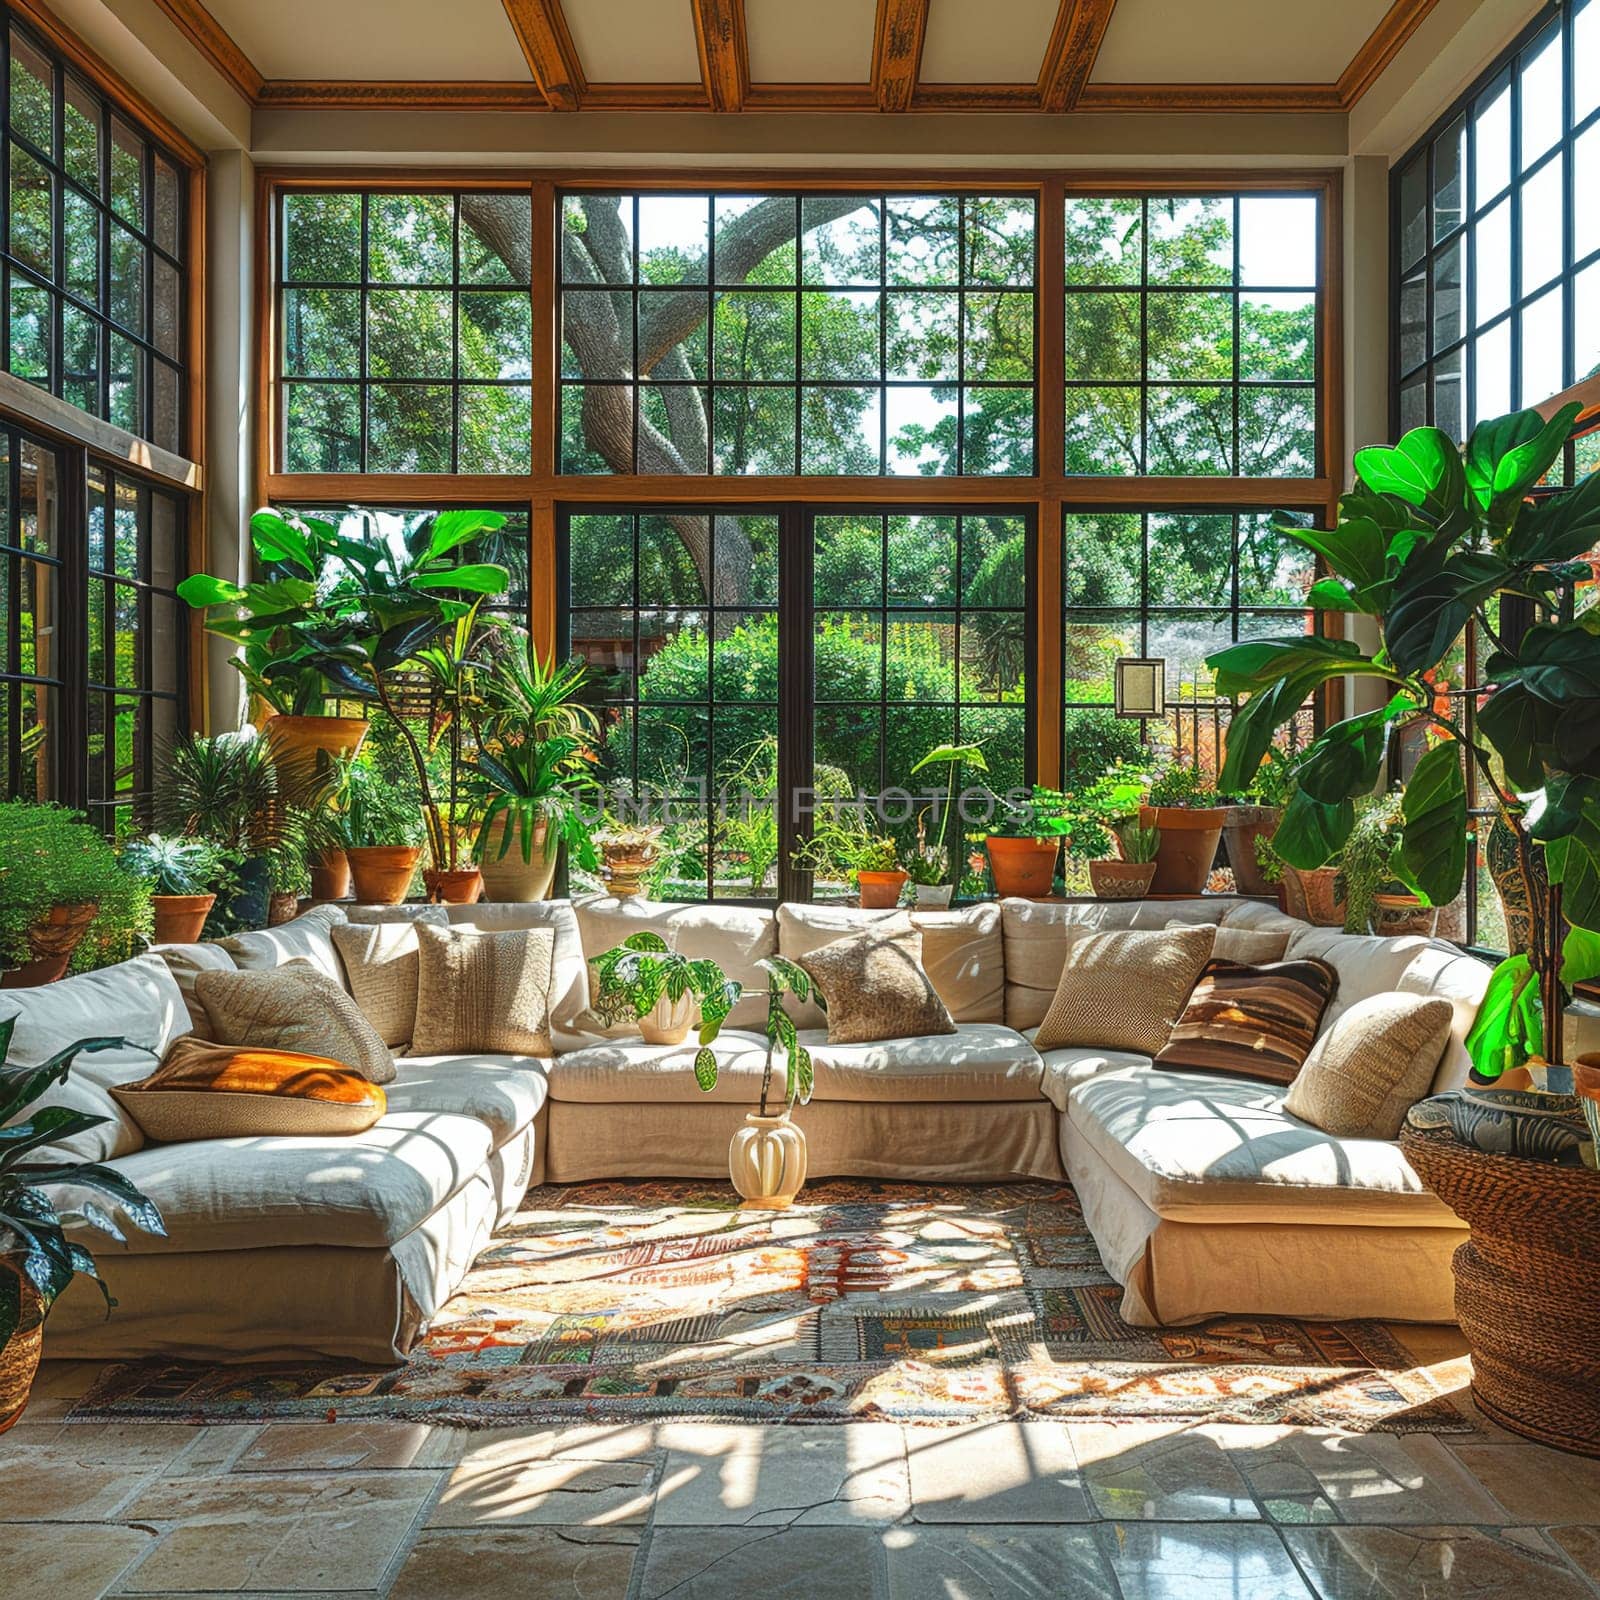 Bright and airy sunroom filled with plants and natural light.